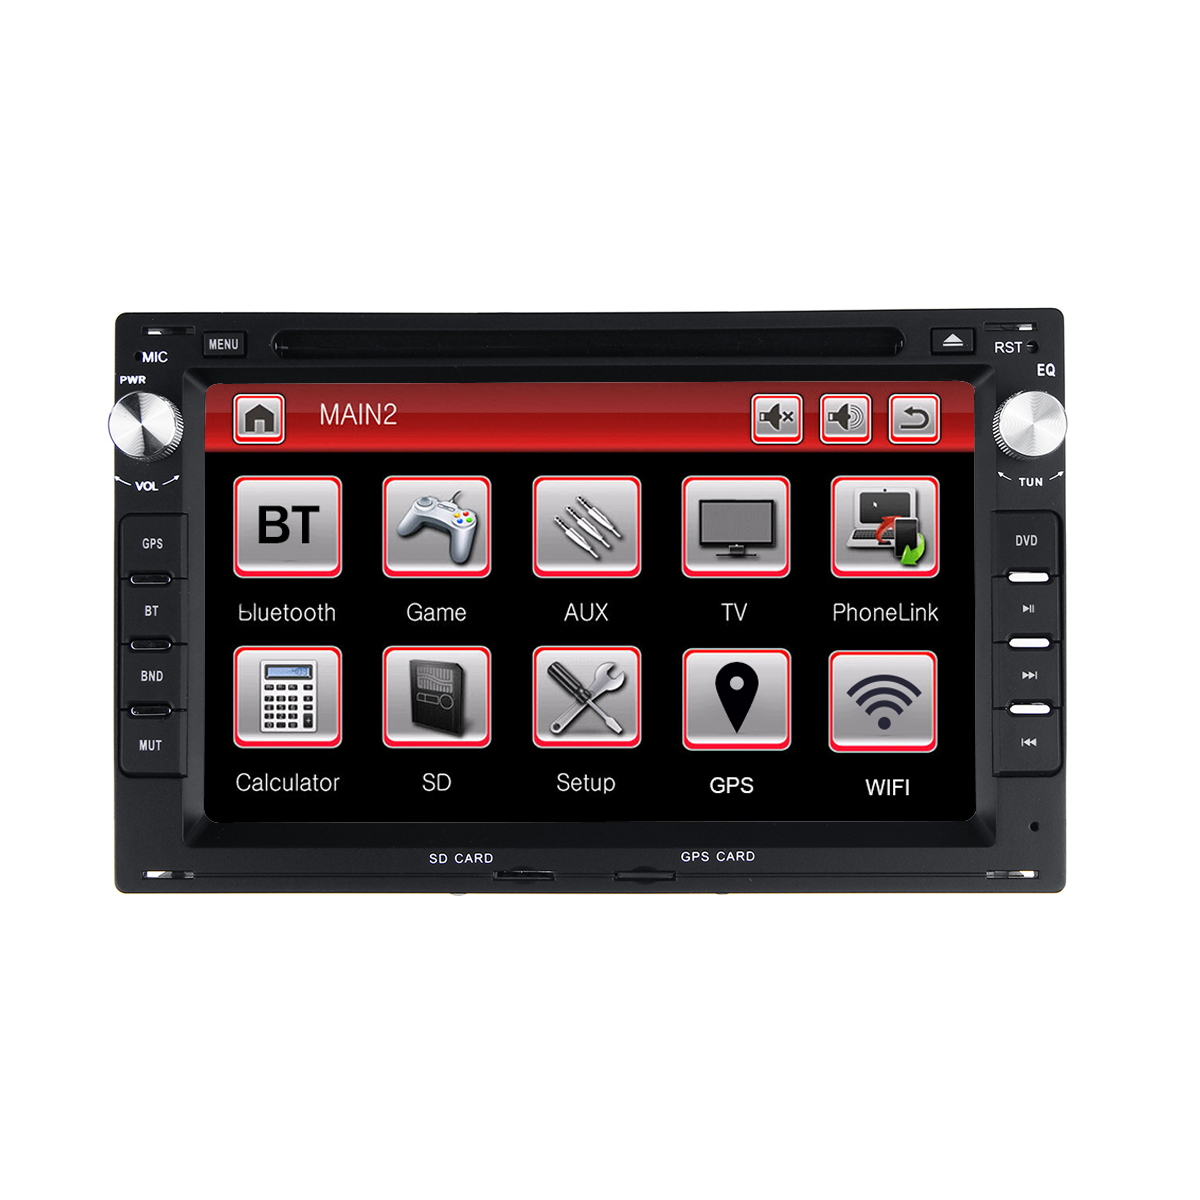 

7 Inch 2 DIN WinCE 6.0 Car DVD Player Quad Core Stereo Radio GPS bluetooth FM AM RDS for VW SEAT SKODA Peugeot